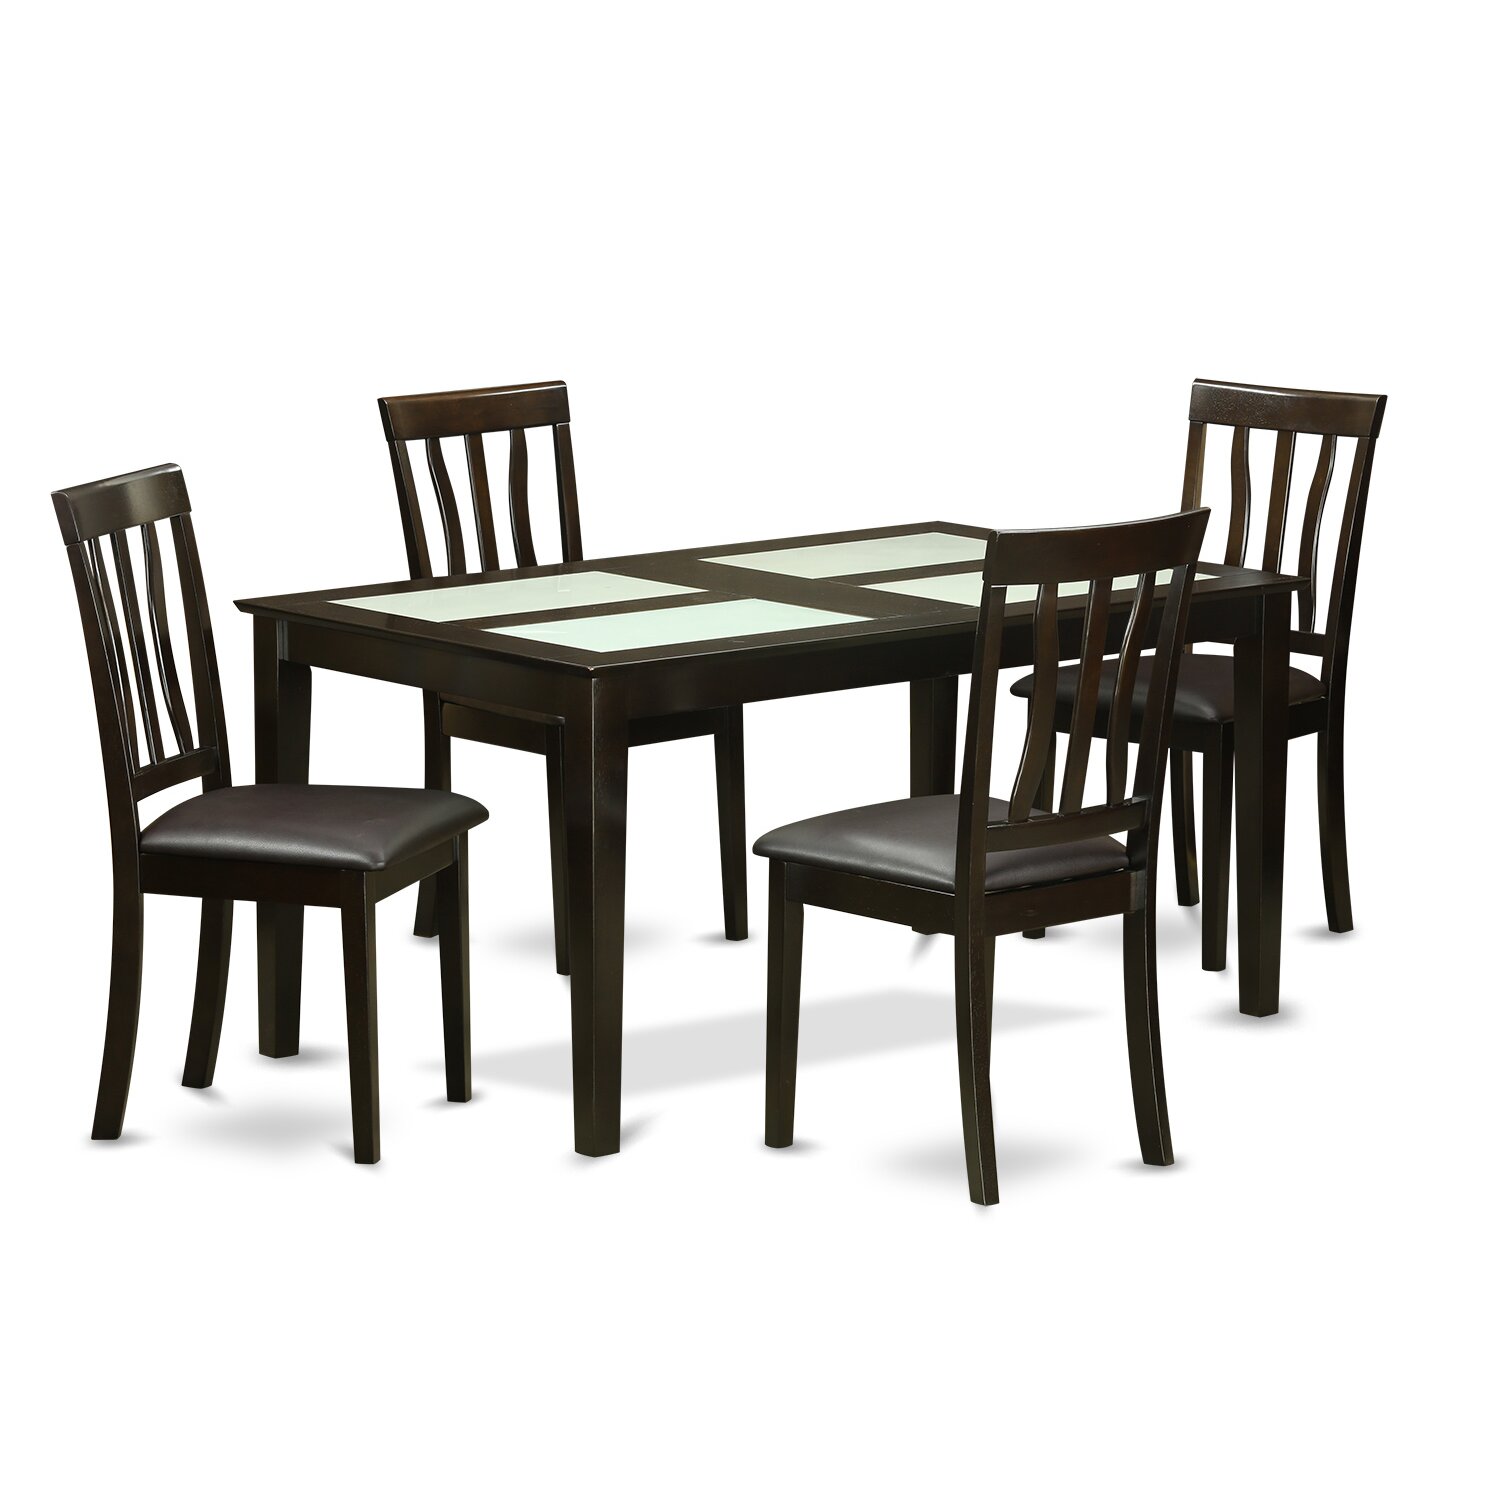 Capri 5 Piece Dining Set by Wooden Importers